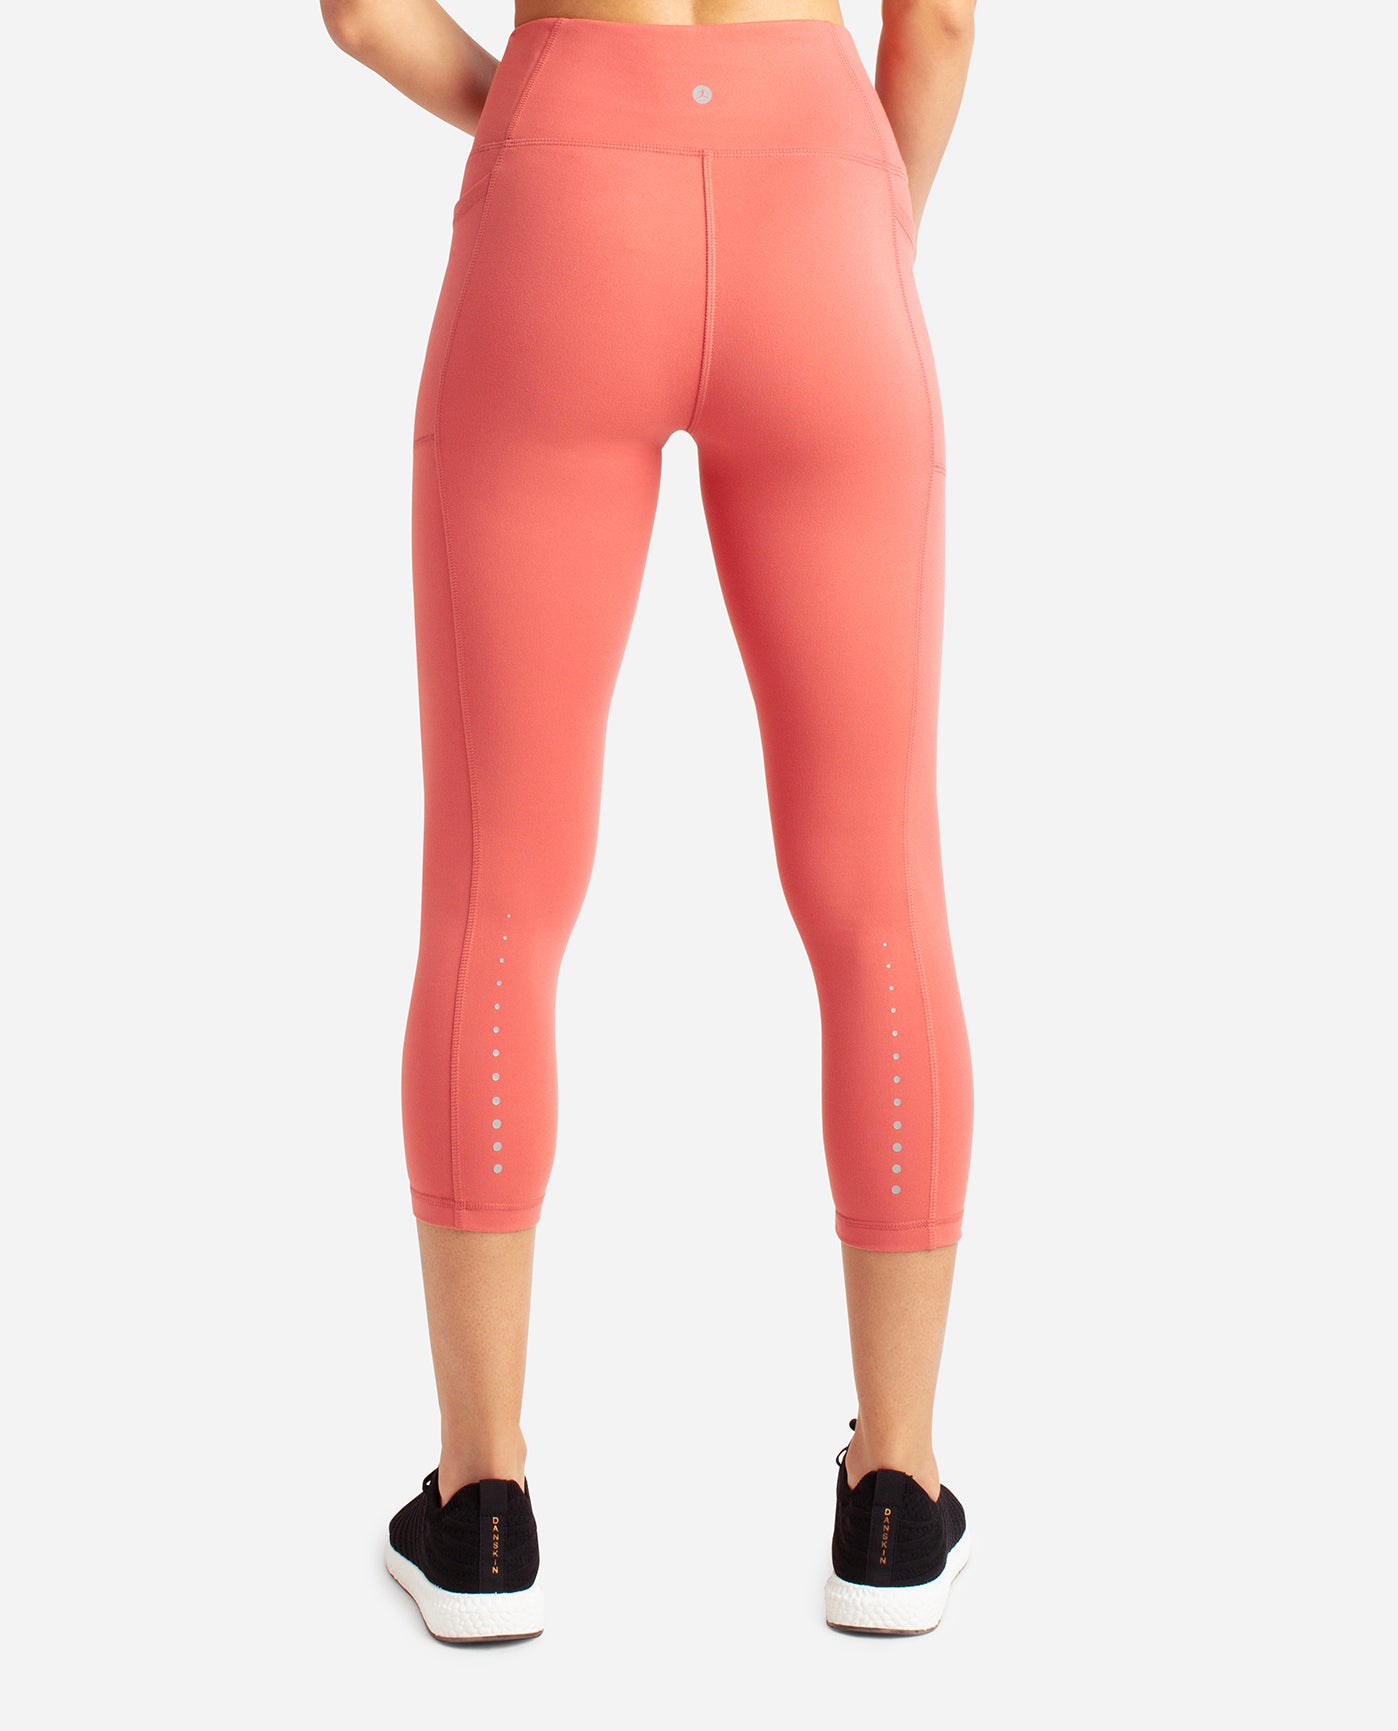 Womens Danskin Yoga Capris Highly Elastic, Flexible, Lightweight, And  Stretchy Calf Length Trousers For Workouts And Exercise Style #3385667 From  Zqnw, $24.39